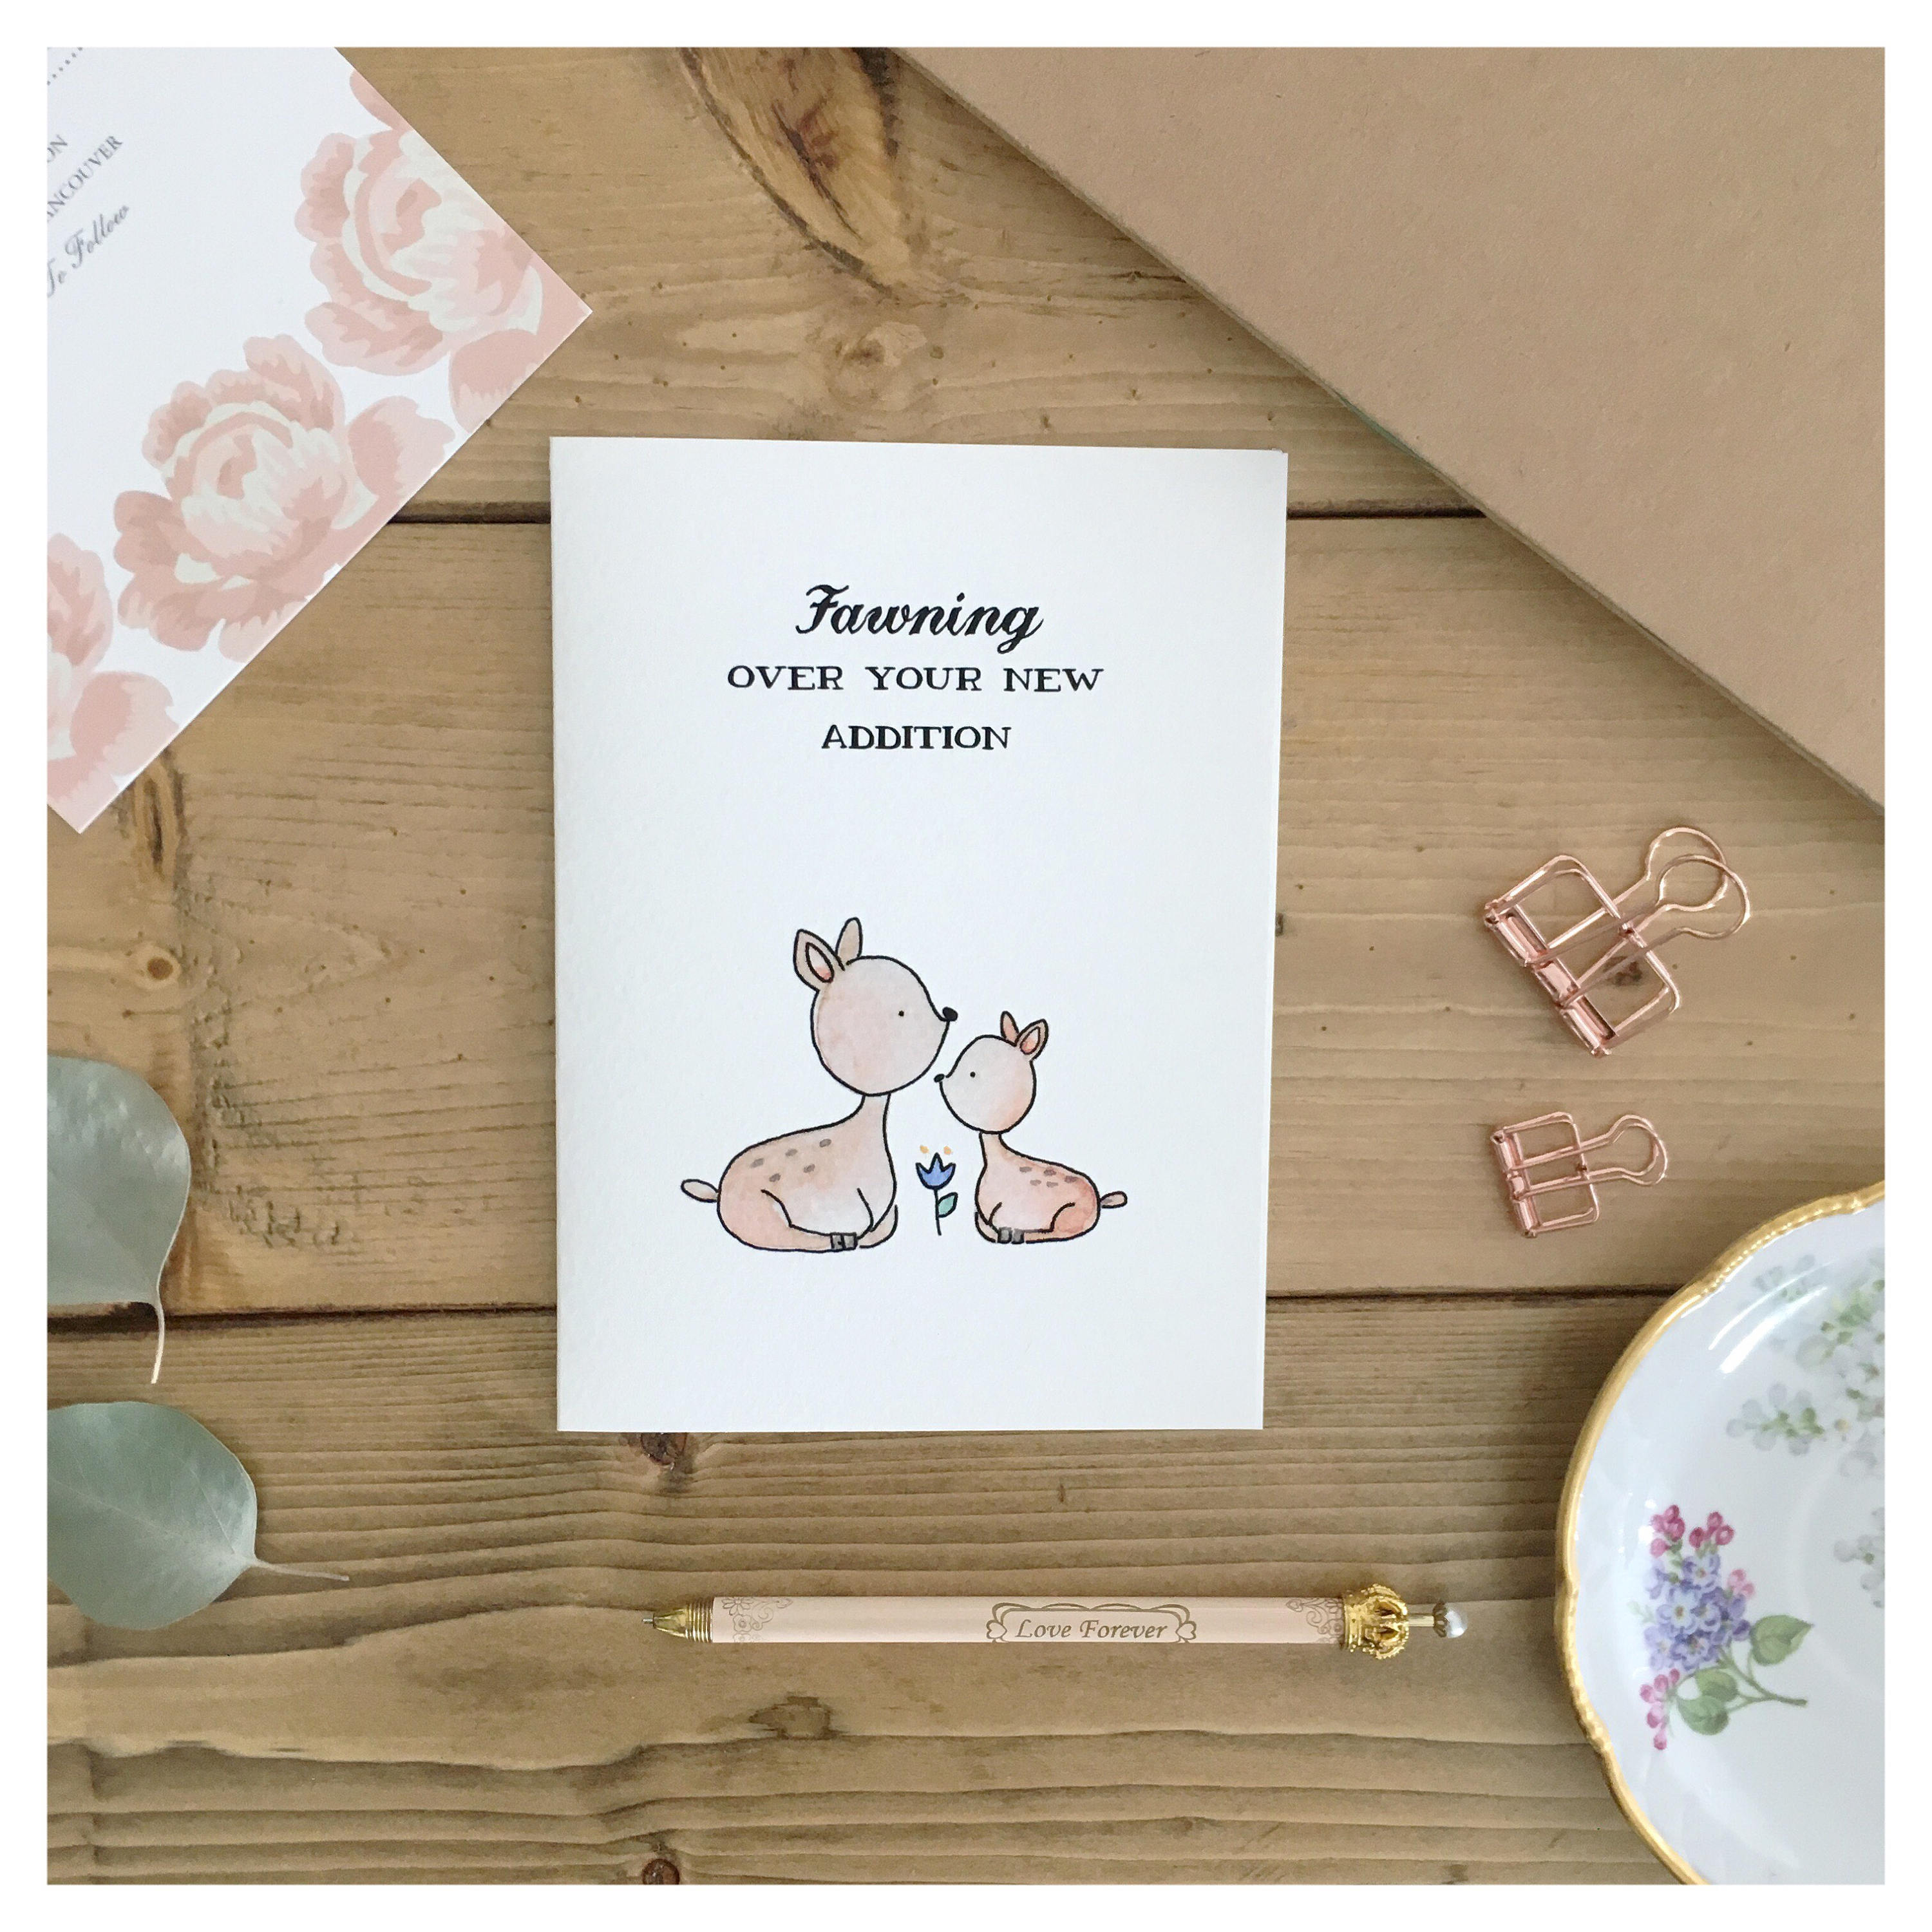 Full Size of Baby Shower:graceful Baby Shower Cards Image Designs Baby Shower Cards As Well As Modern Baby Shower Themes With Cheap Baby Shower Plus Baby Shower Greetings Together With Baby Shower Thank You